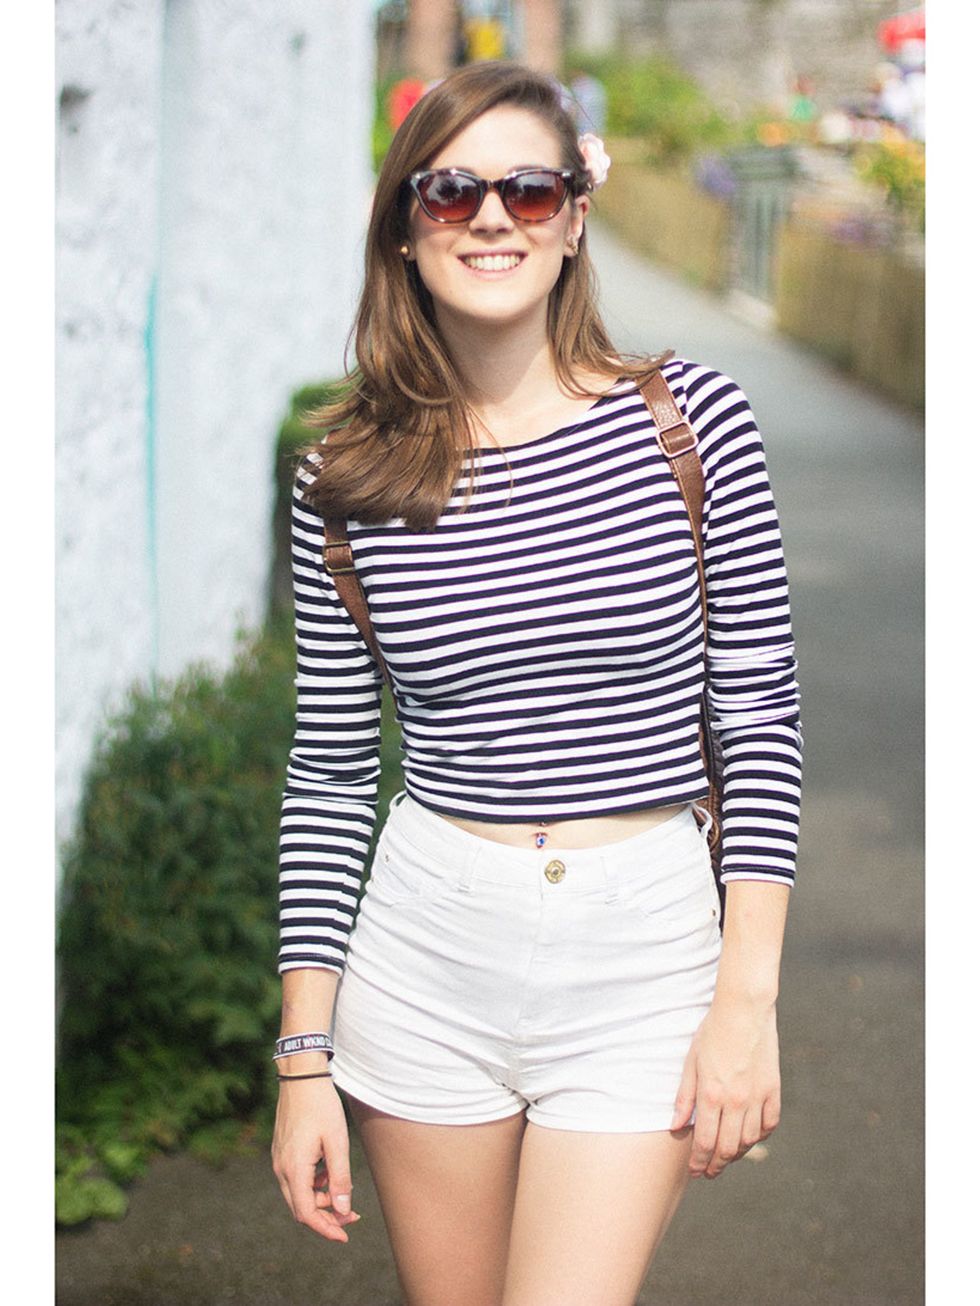 Emma Clarke wears H&M top and River Island shorts.